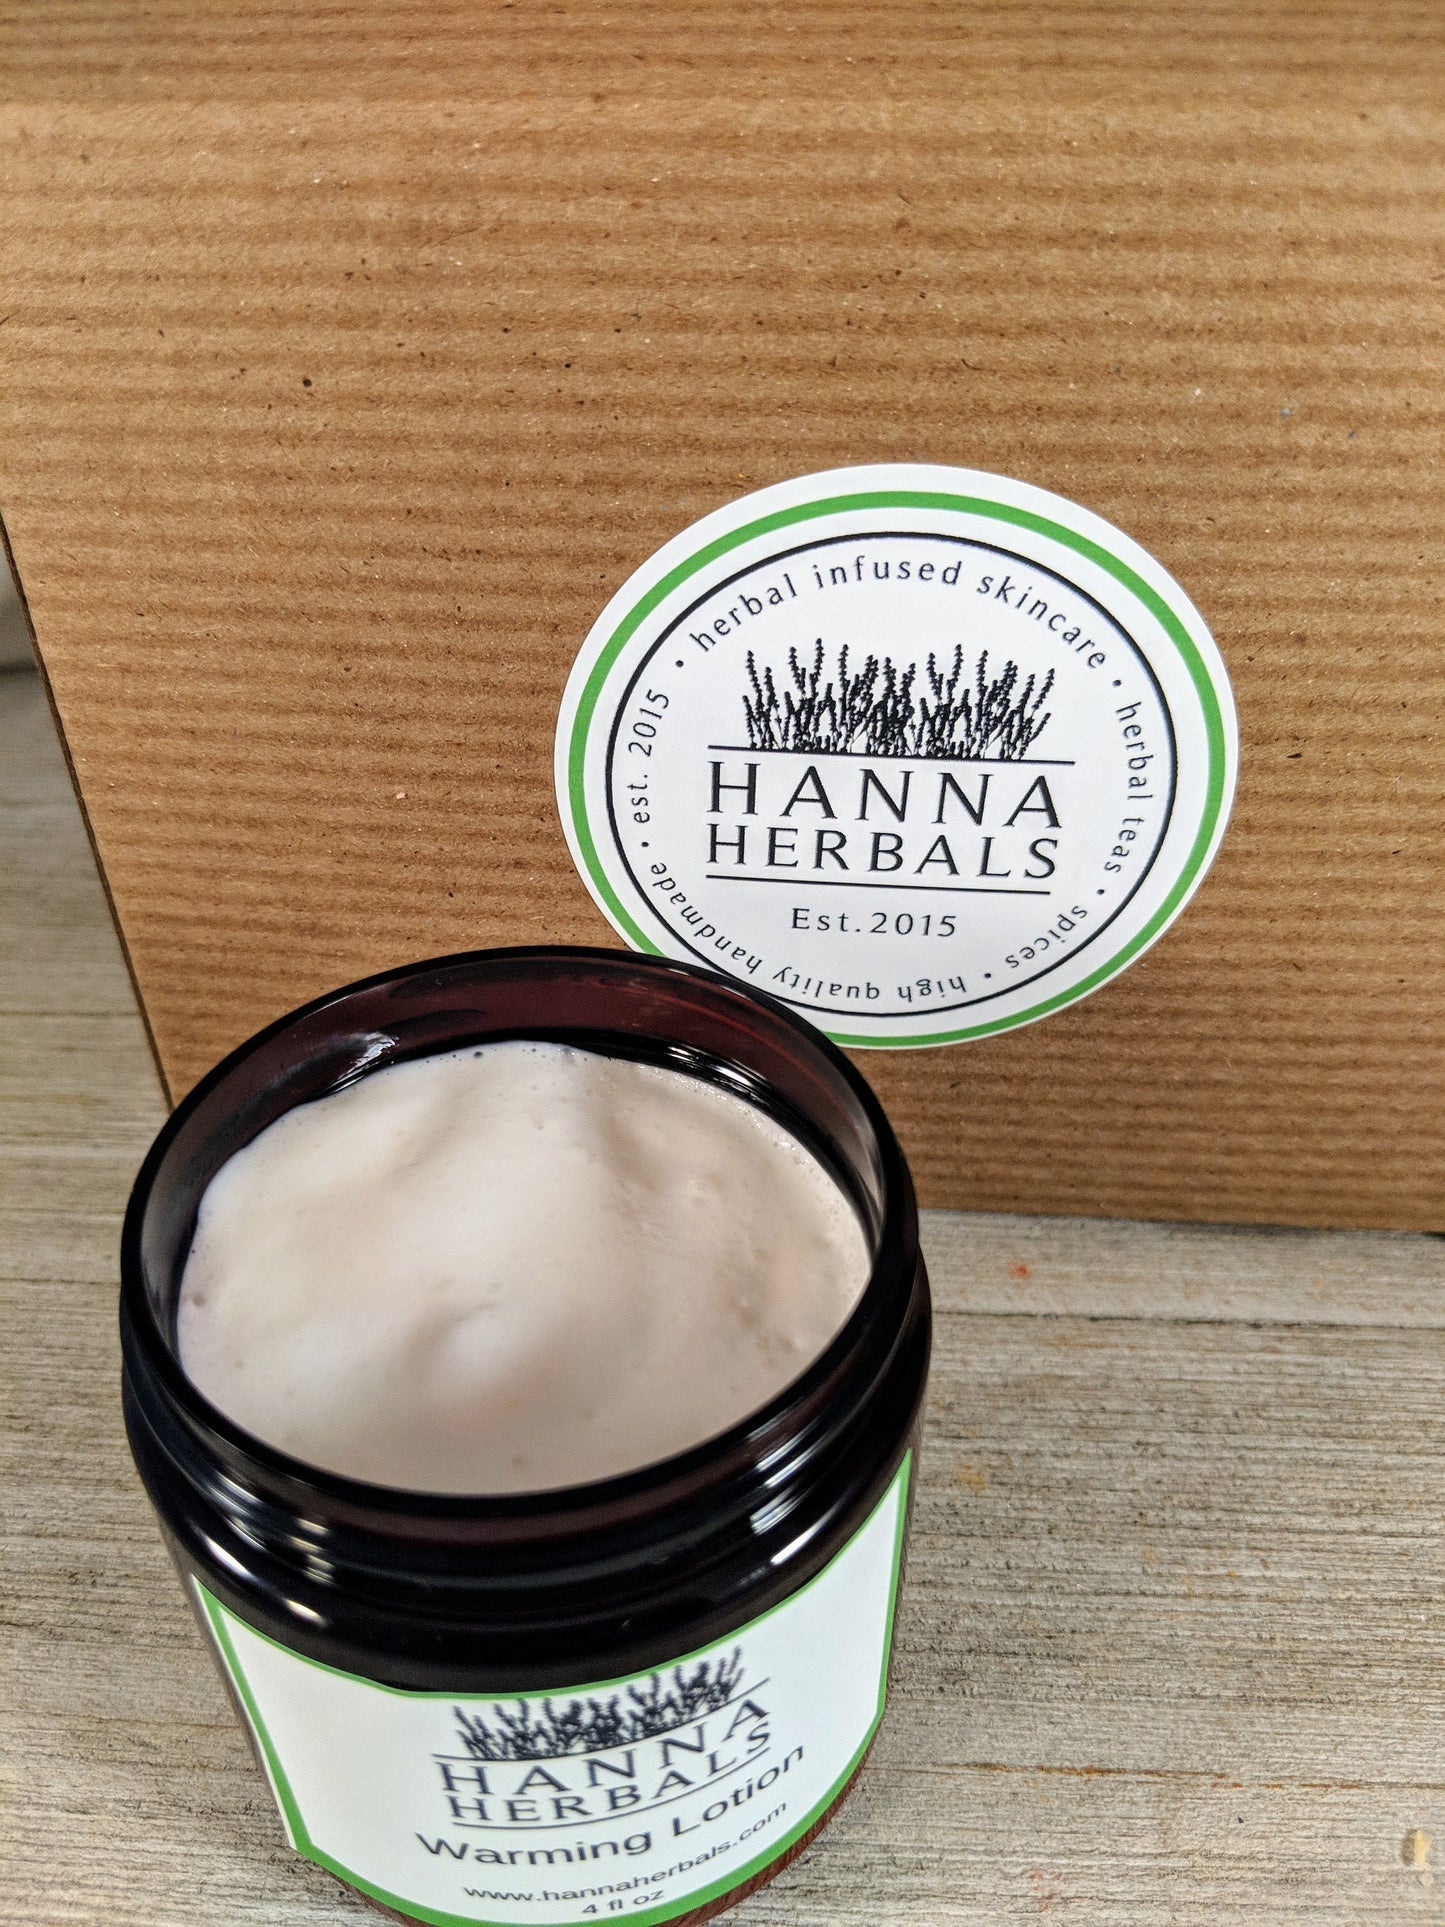 Warming Body Lotion - warming lotion, all natural lotion, essential oils, homemade lotion, body lotion, essential oil, handmade lotion